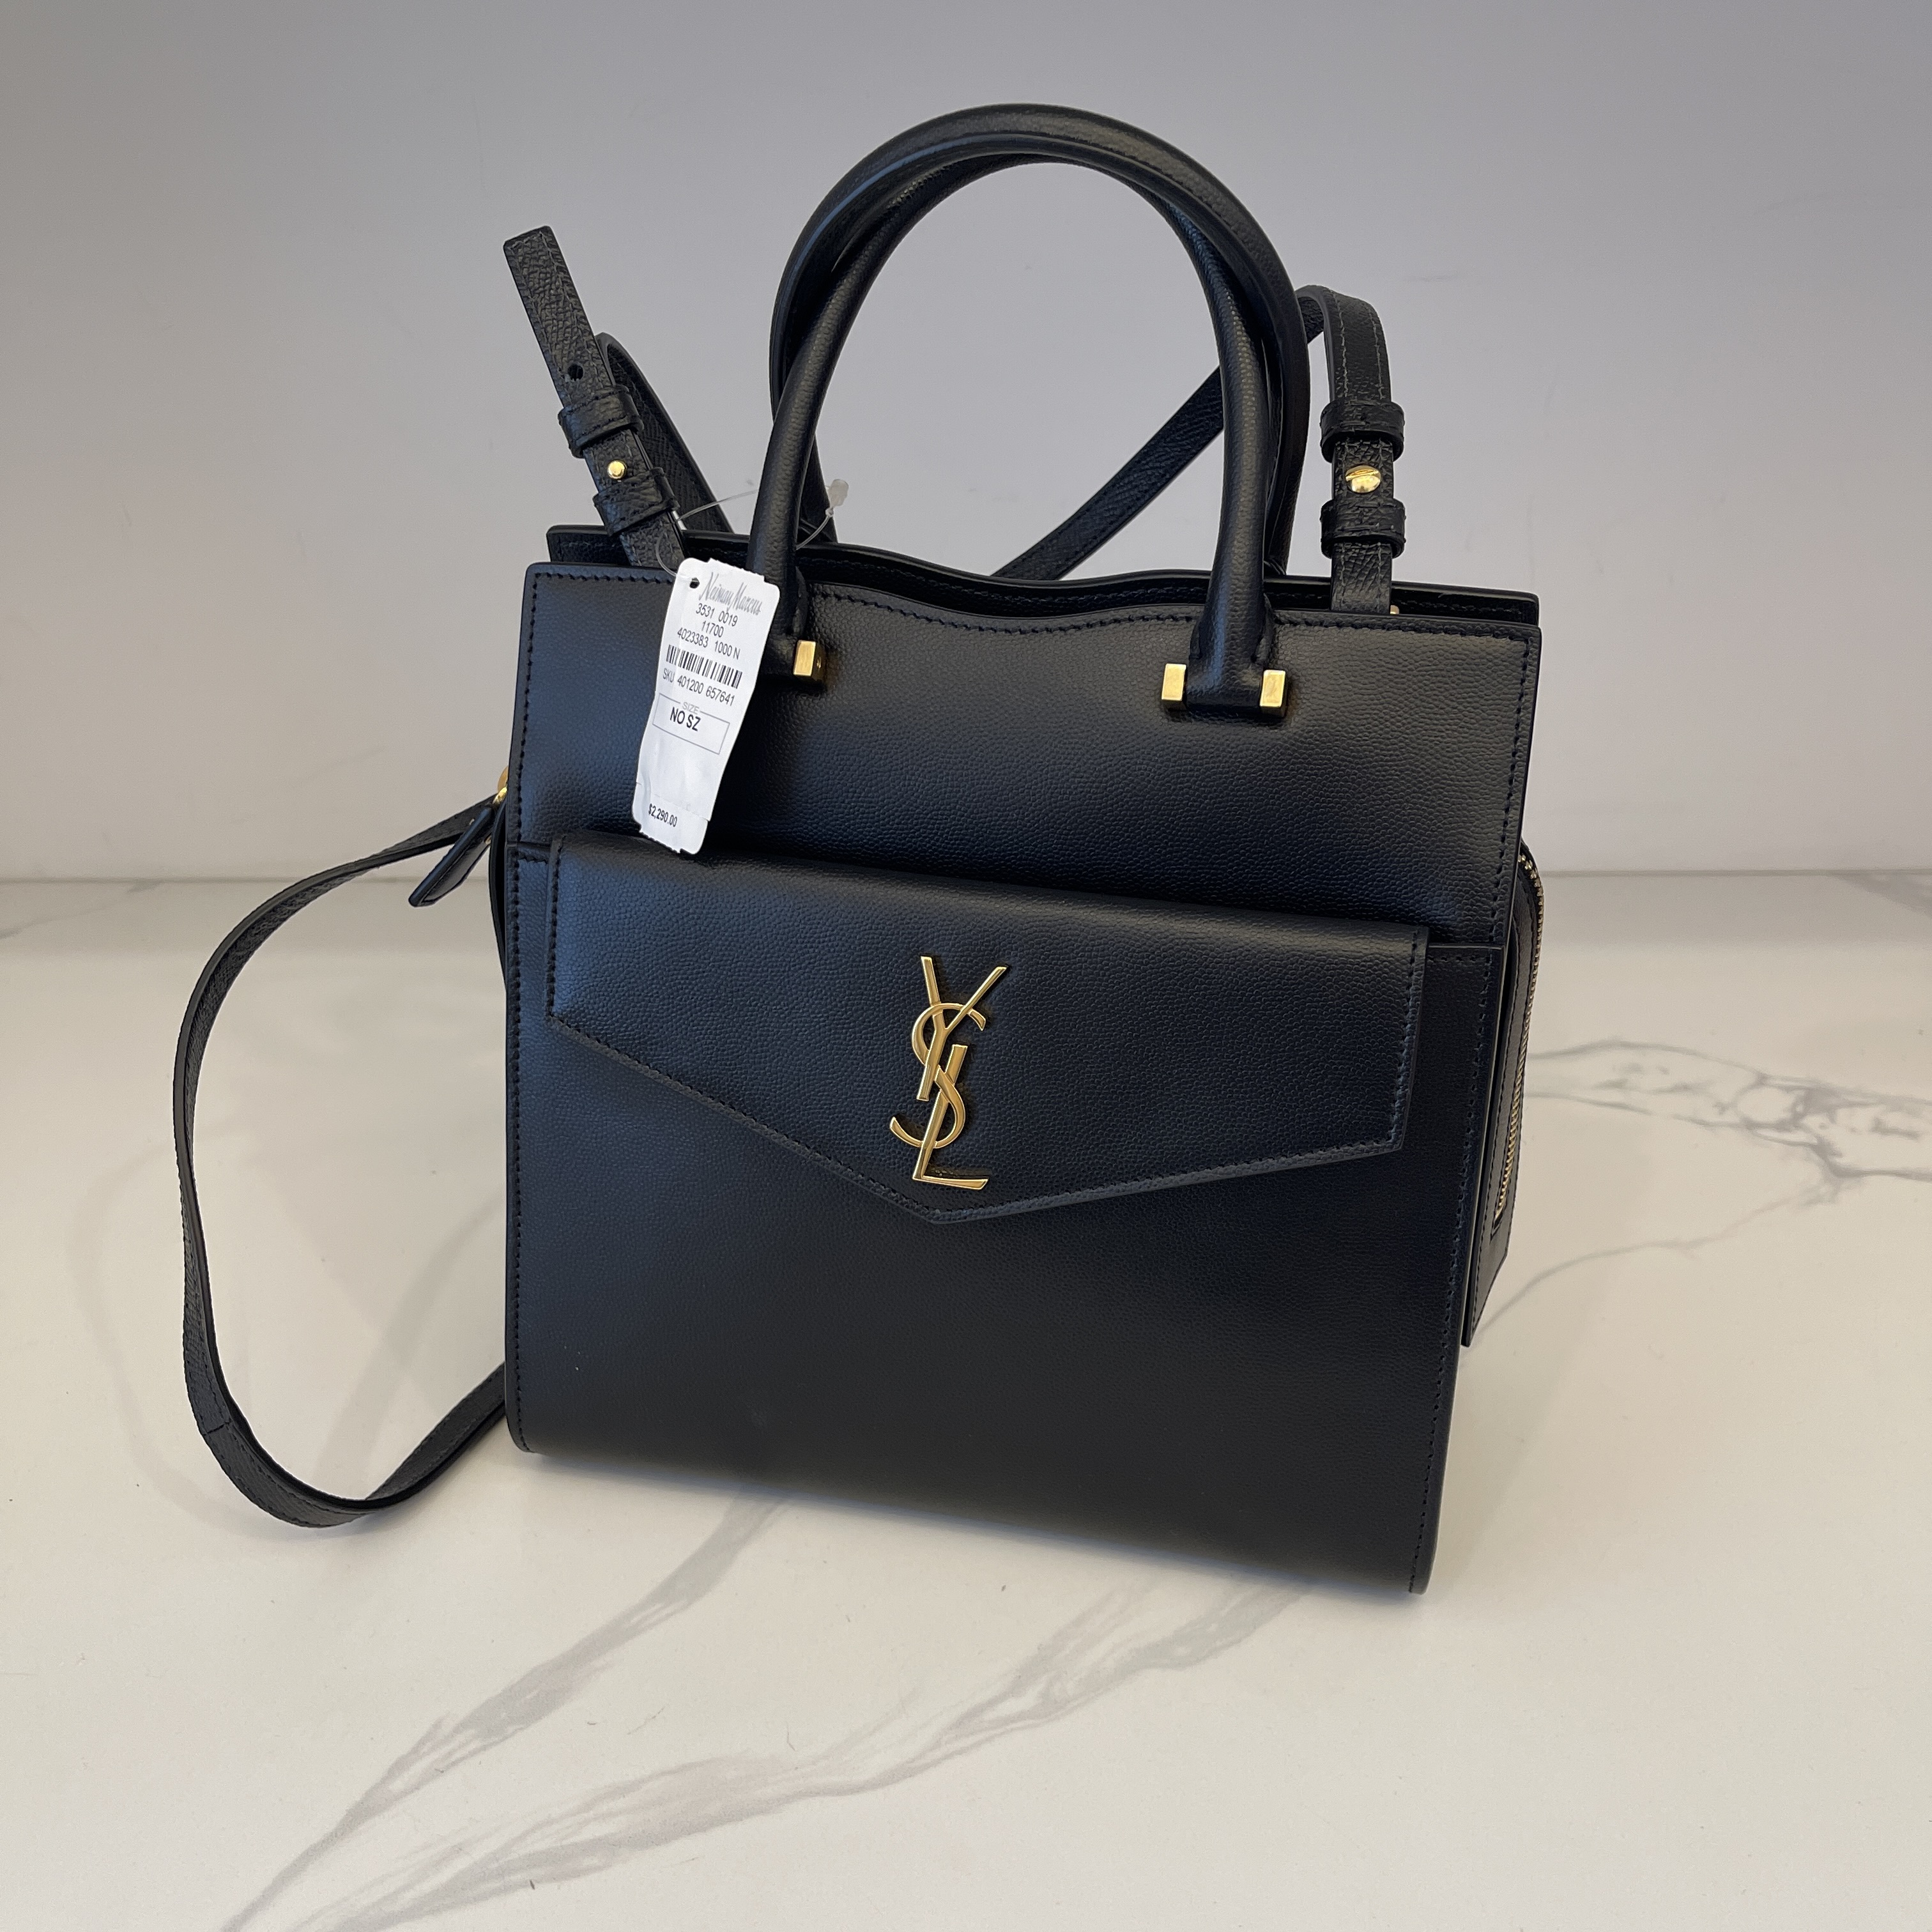 Yves Saint Laurent Small Uptown Tote Shiny Smooth Leather (Varied